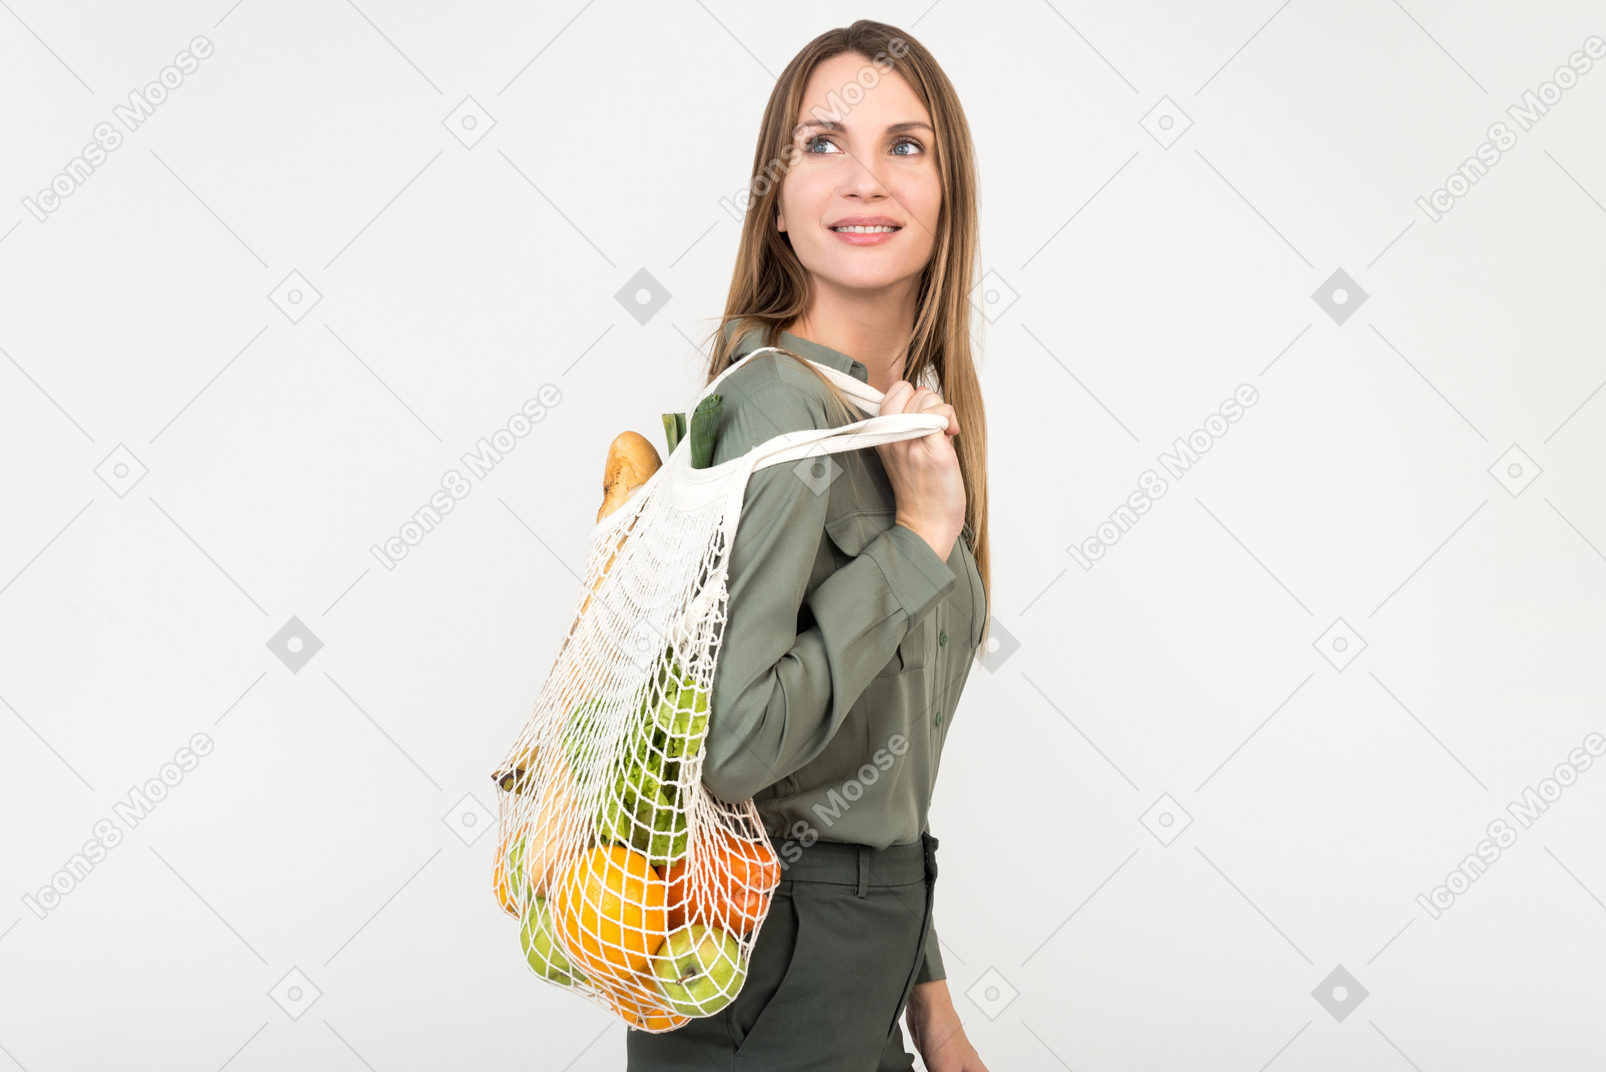 Young woman holding a string-bag with some organic food in it